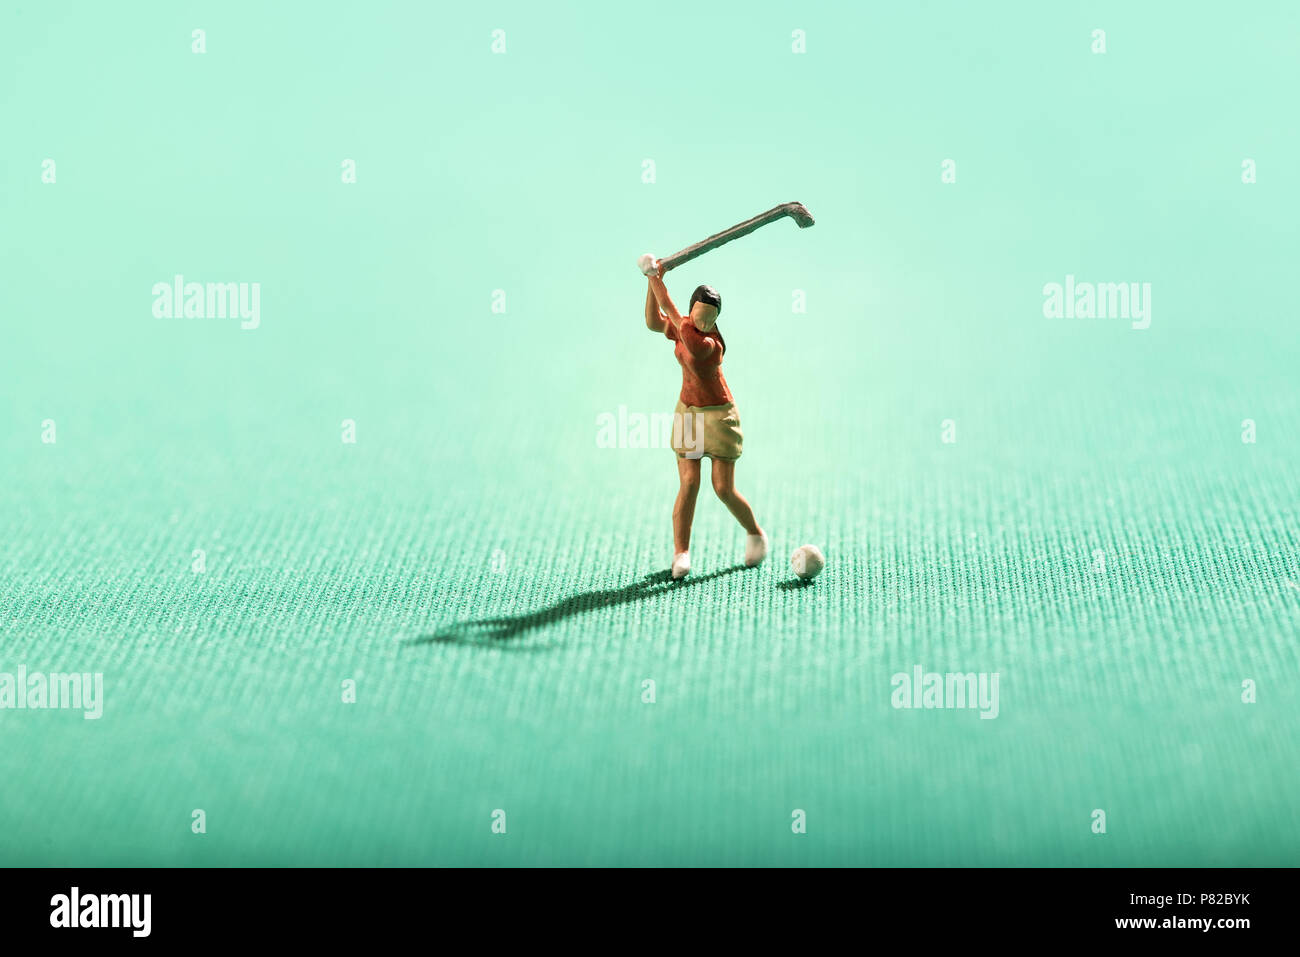 Miniature woman playing golf on a green swinging her golf club or driver as she plays a shot with shadow and copy space Stock Photo